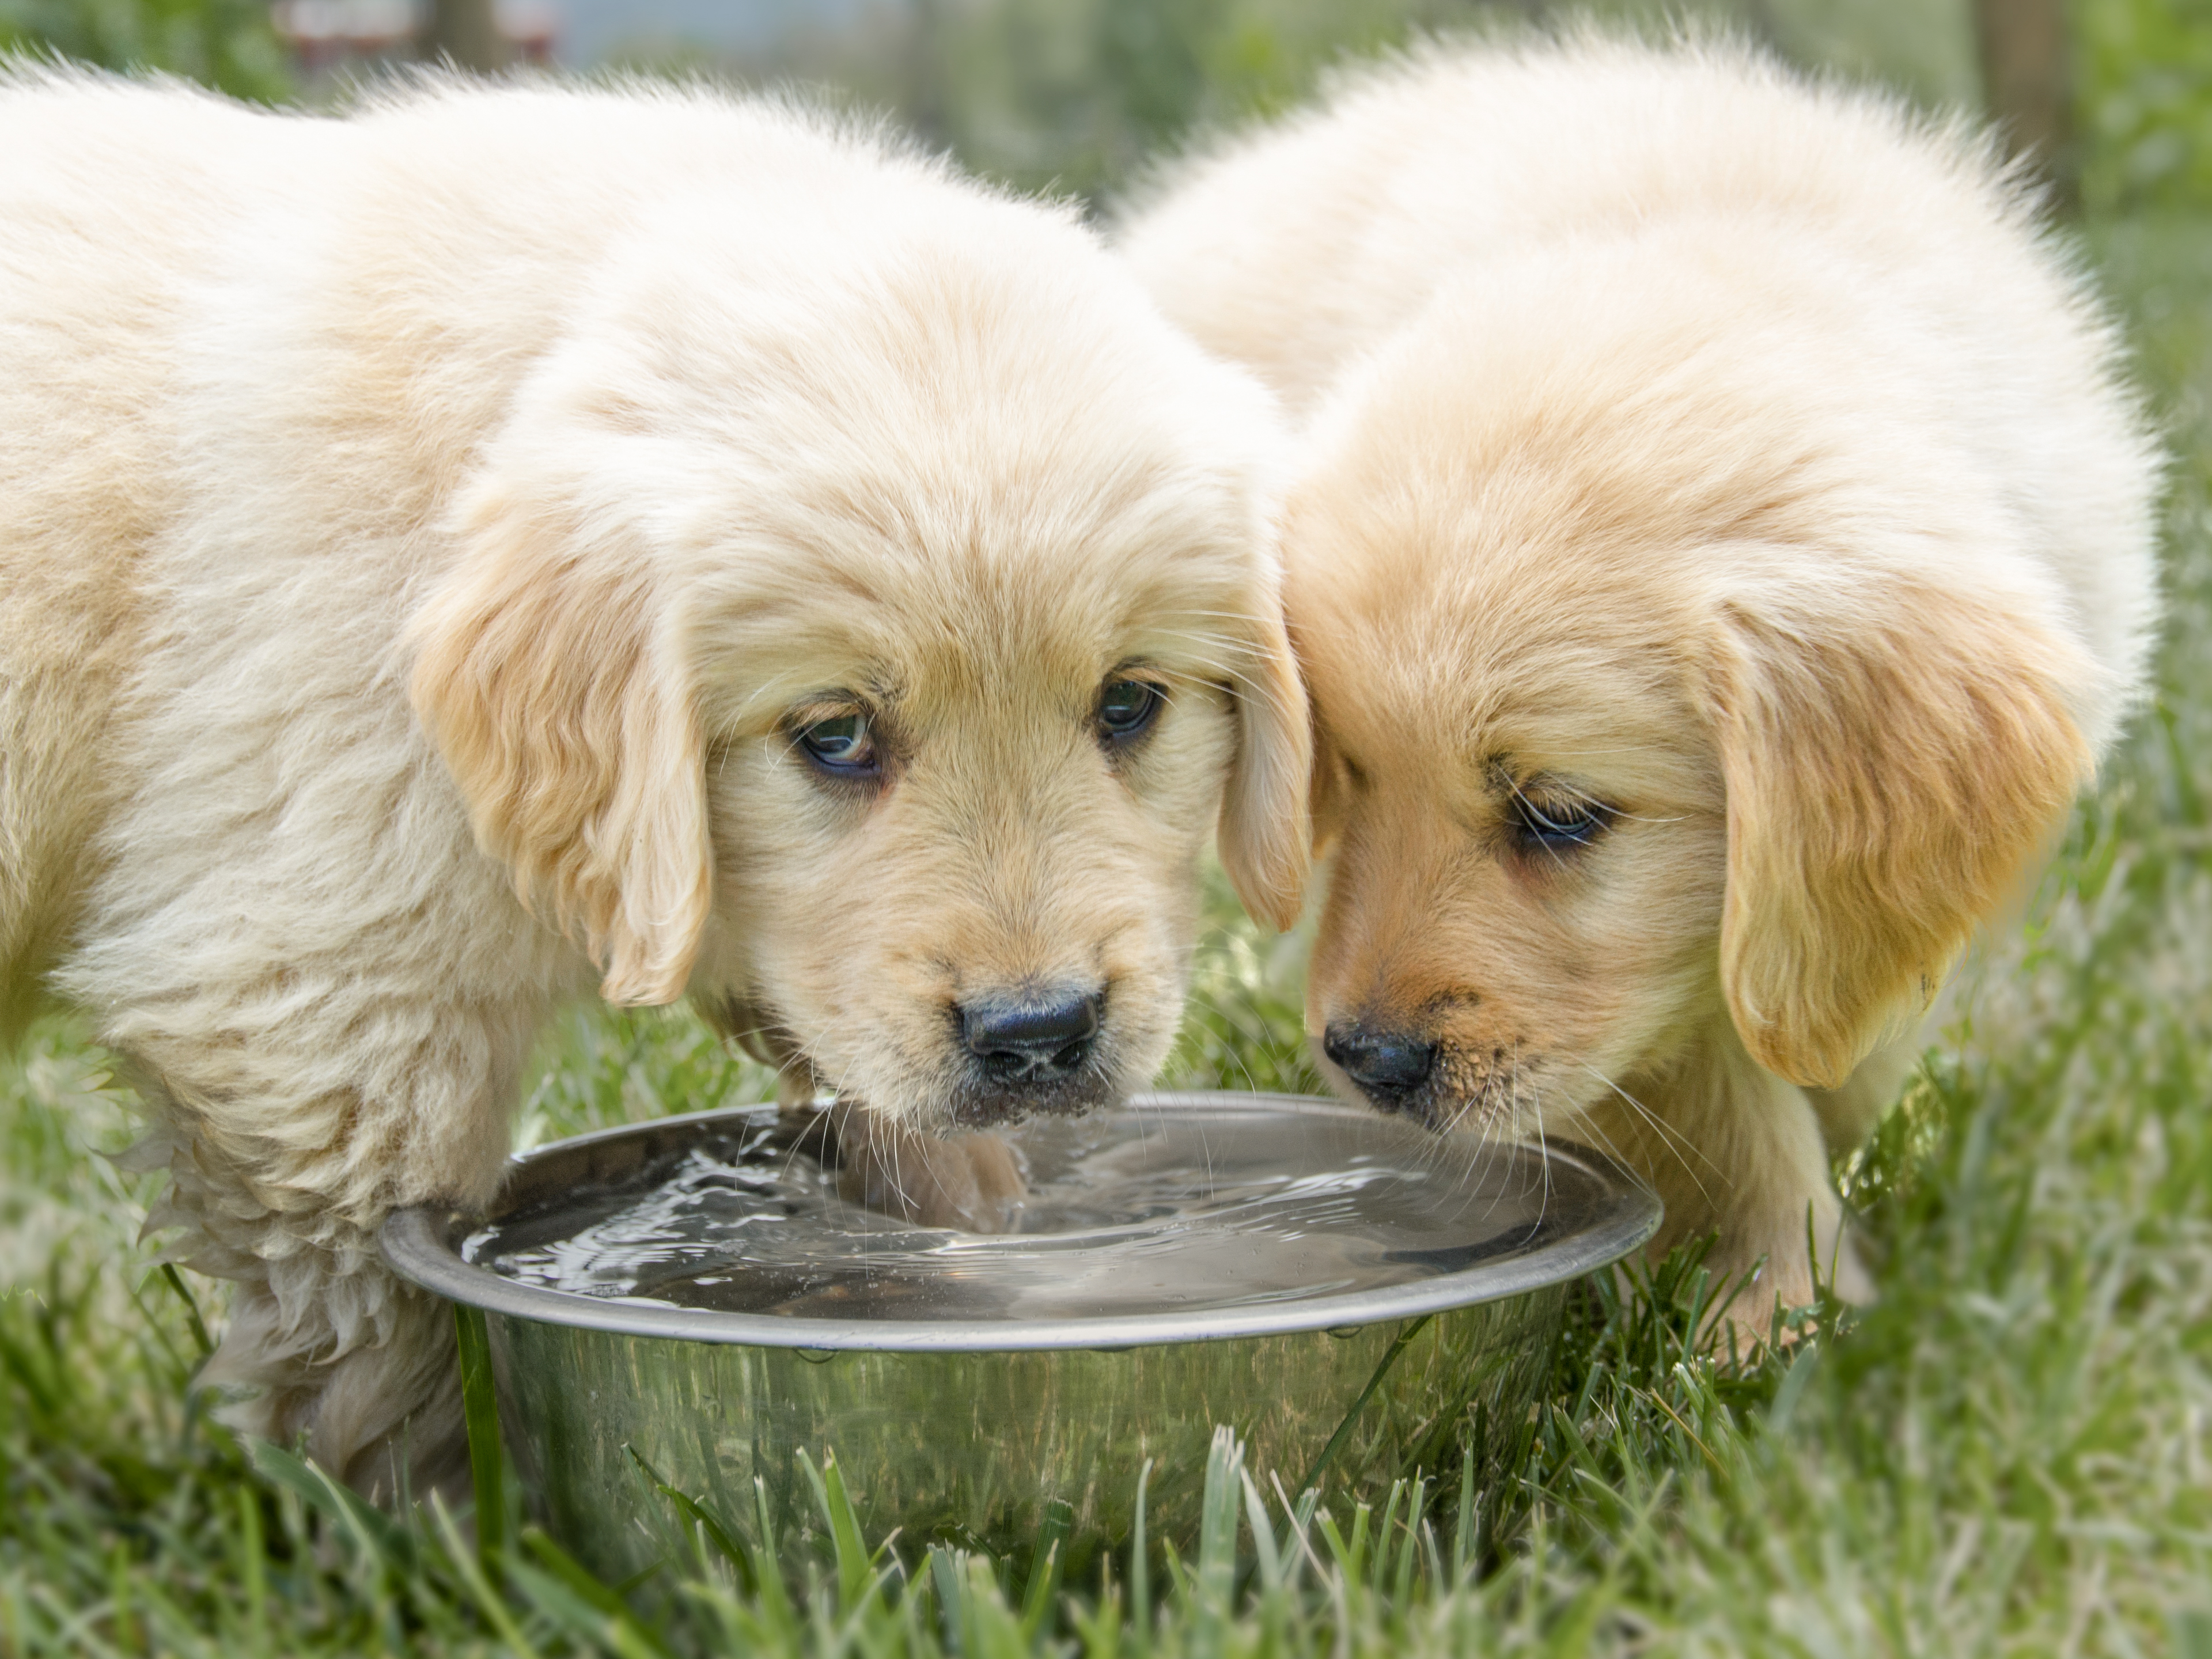 Two Golden Retriever puppies standing together outdoors drinking from a stainless steel bowl